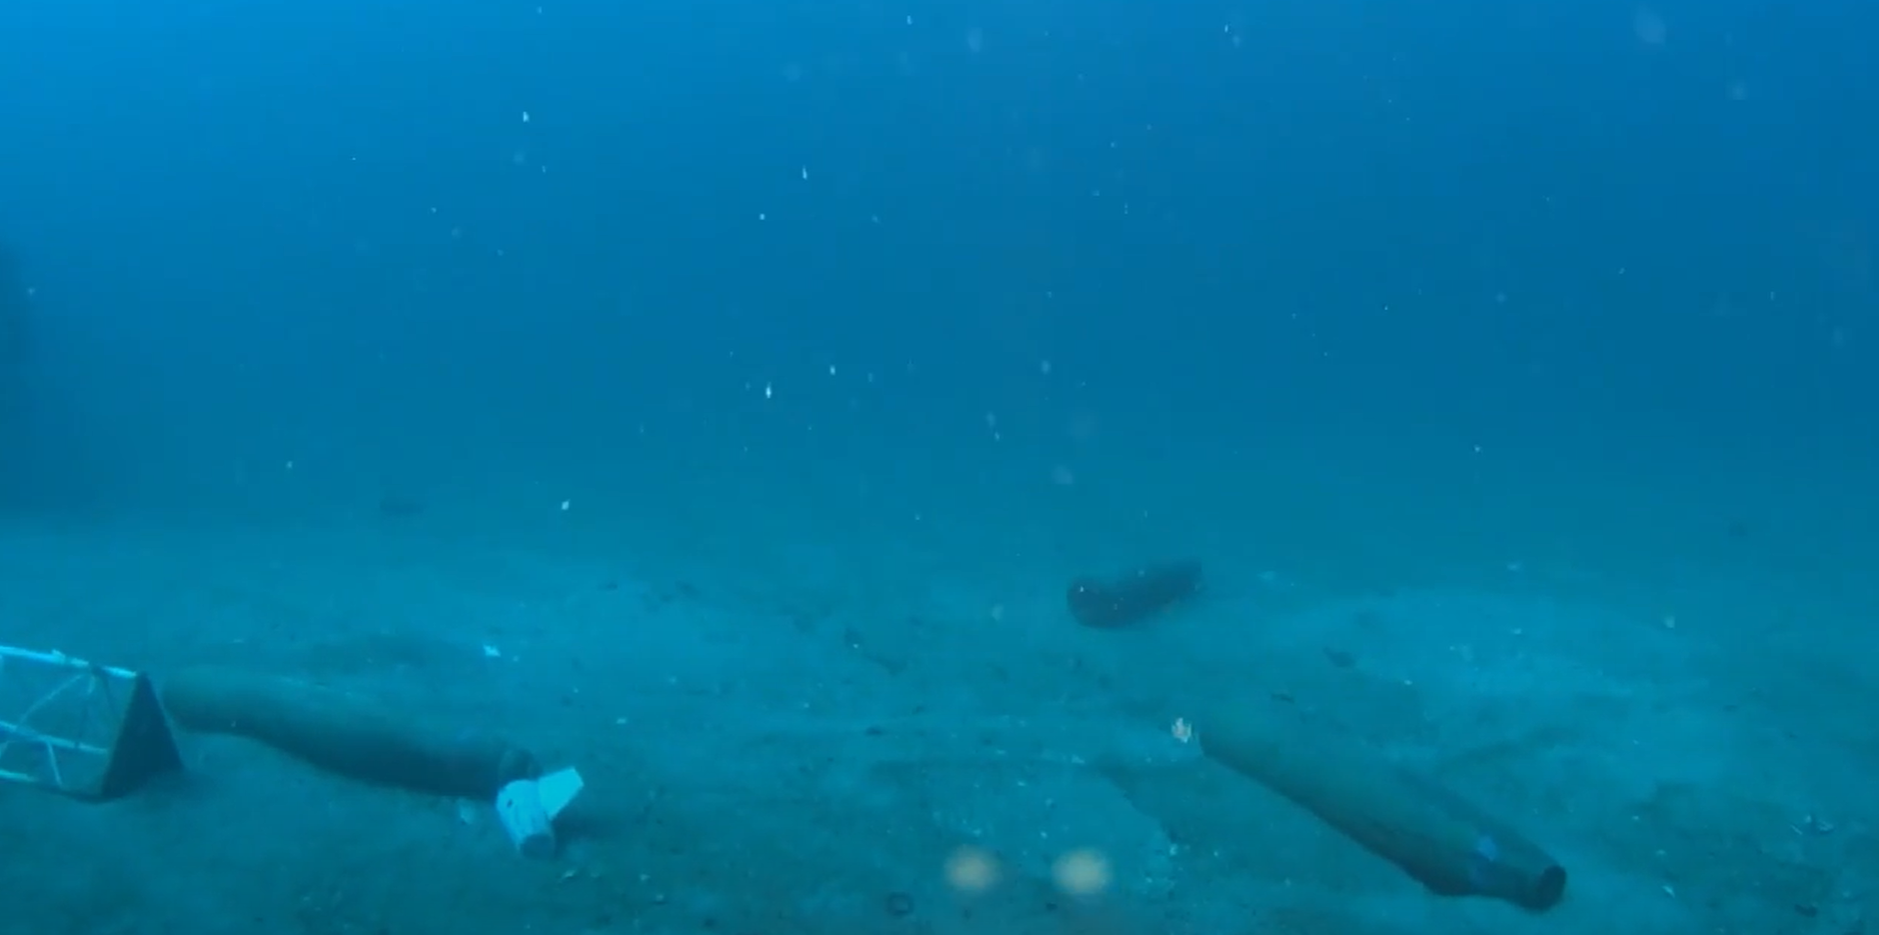 Underwater view from a DTG3 ROV showing dud munitions